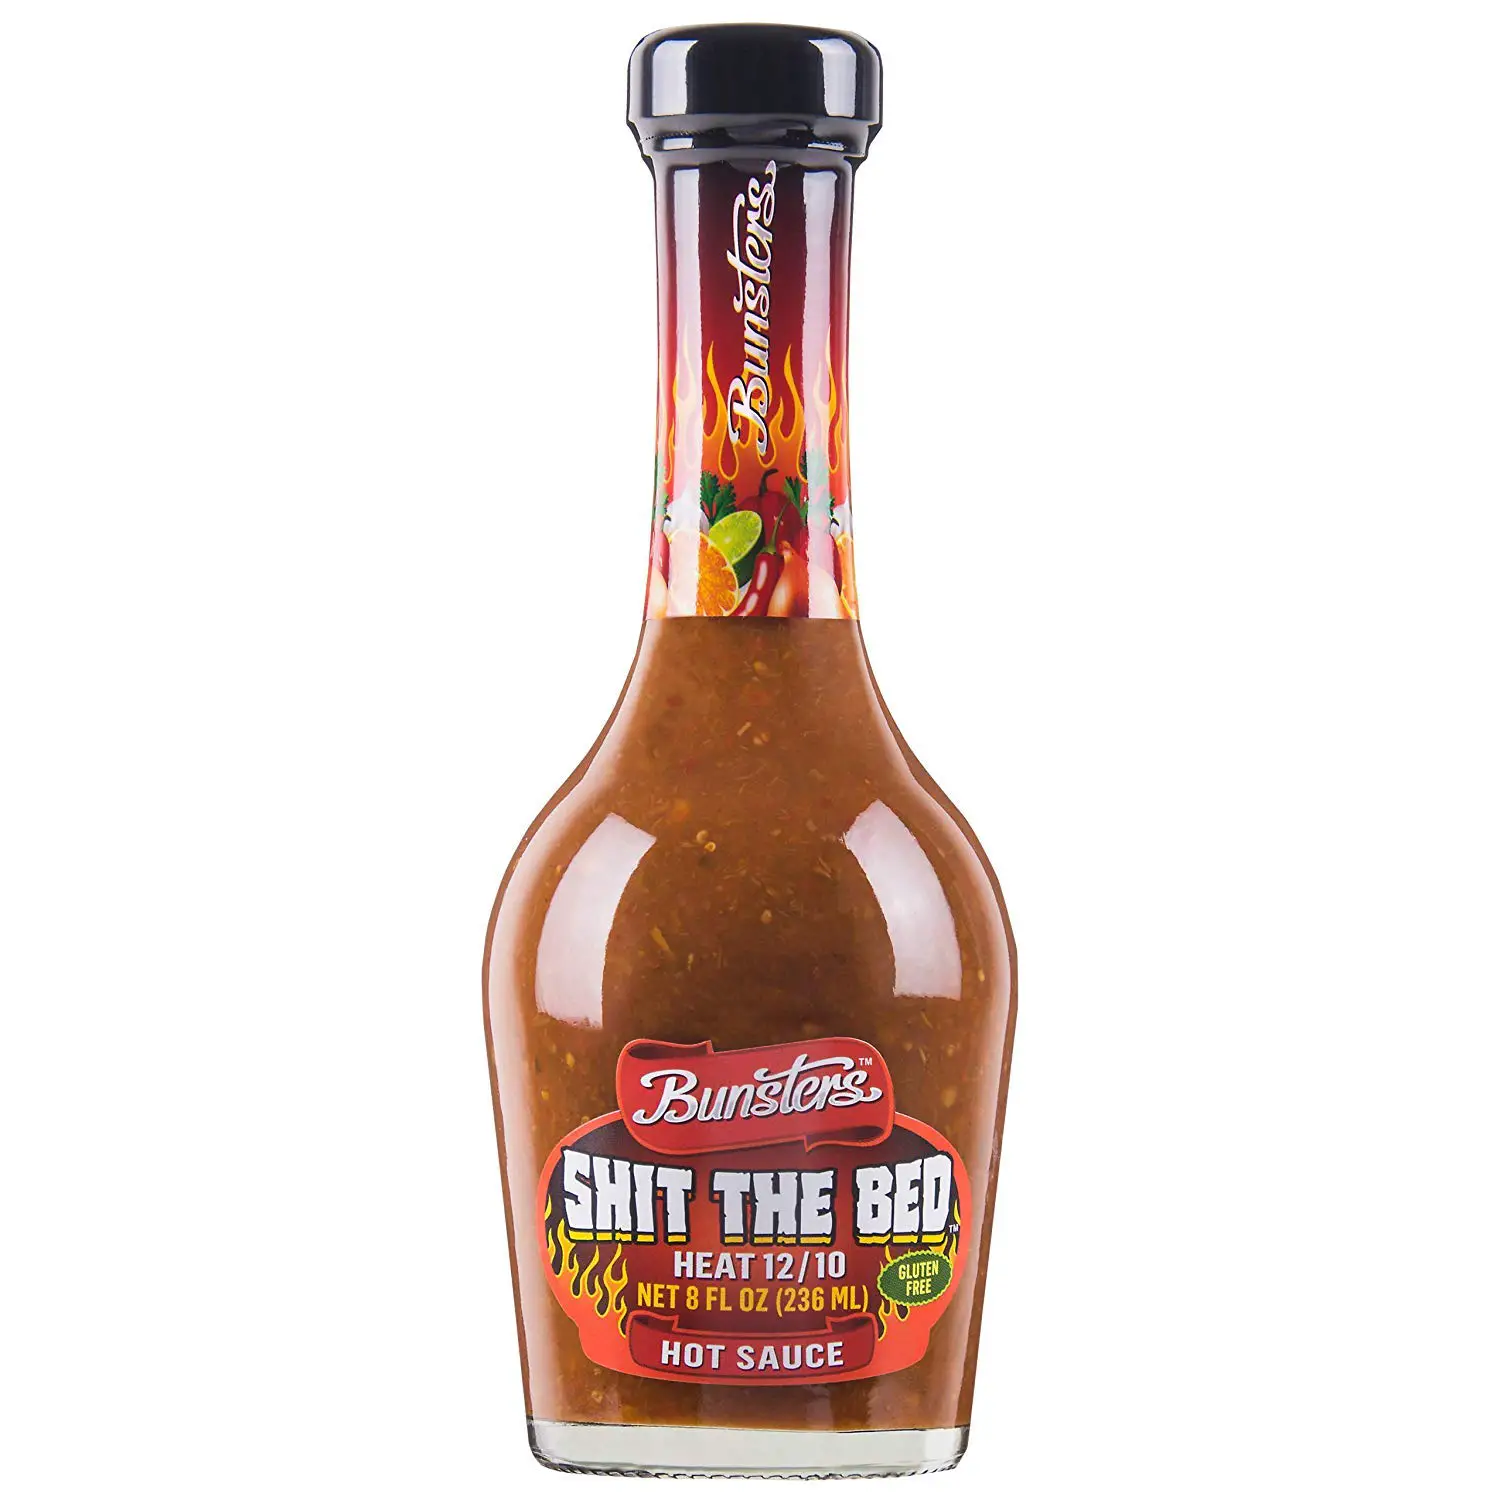 Bunsters Sh*t the Bed Hot Sauce is Leaving Customers on the Toilet